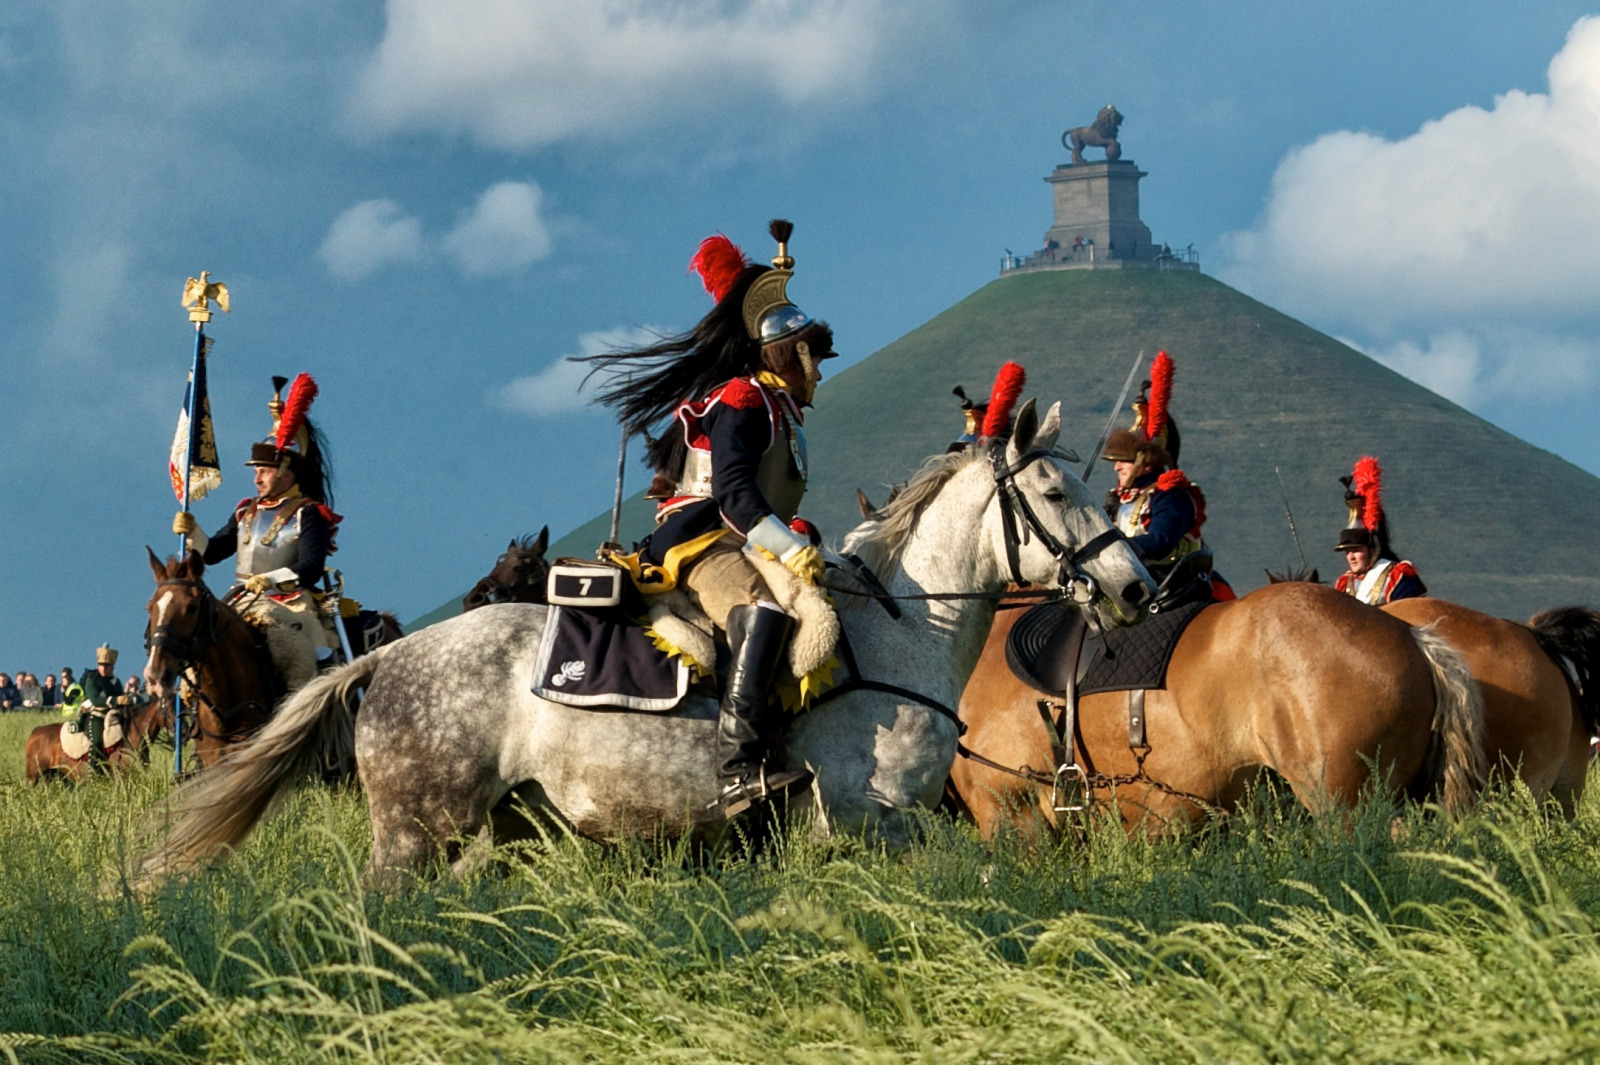 Group of soldiers on horses in front of the Lion's mound